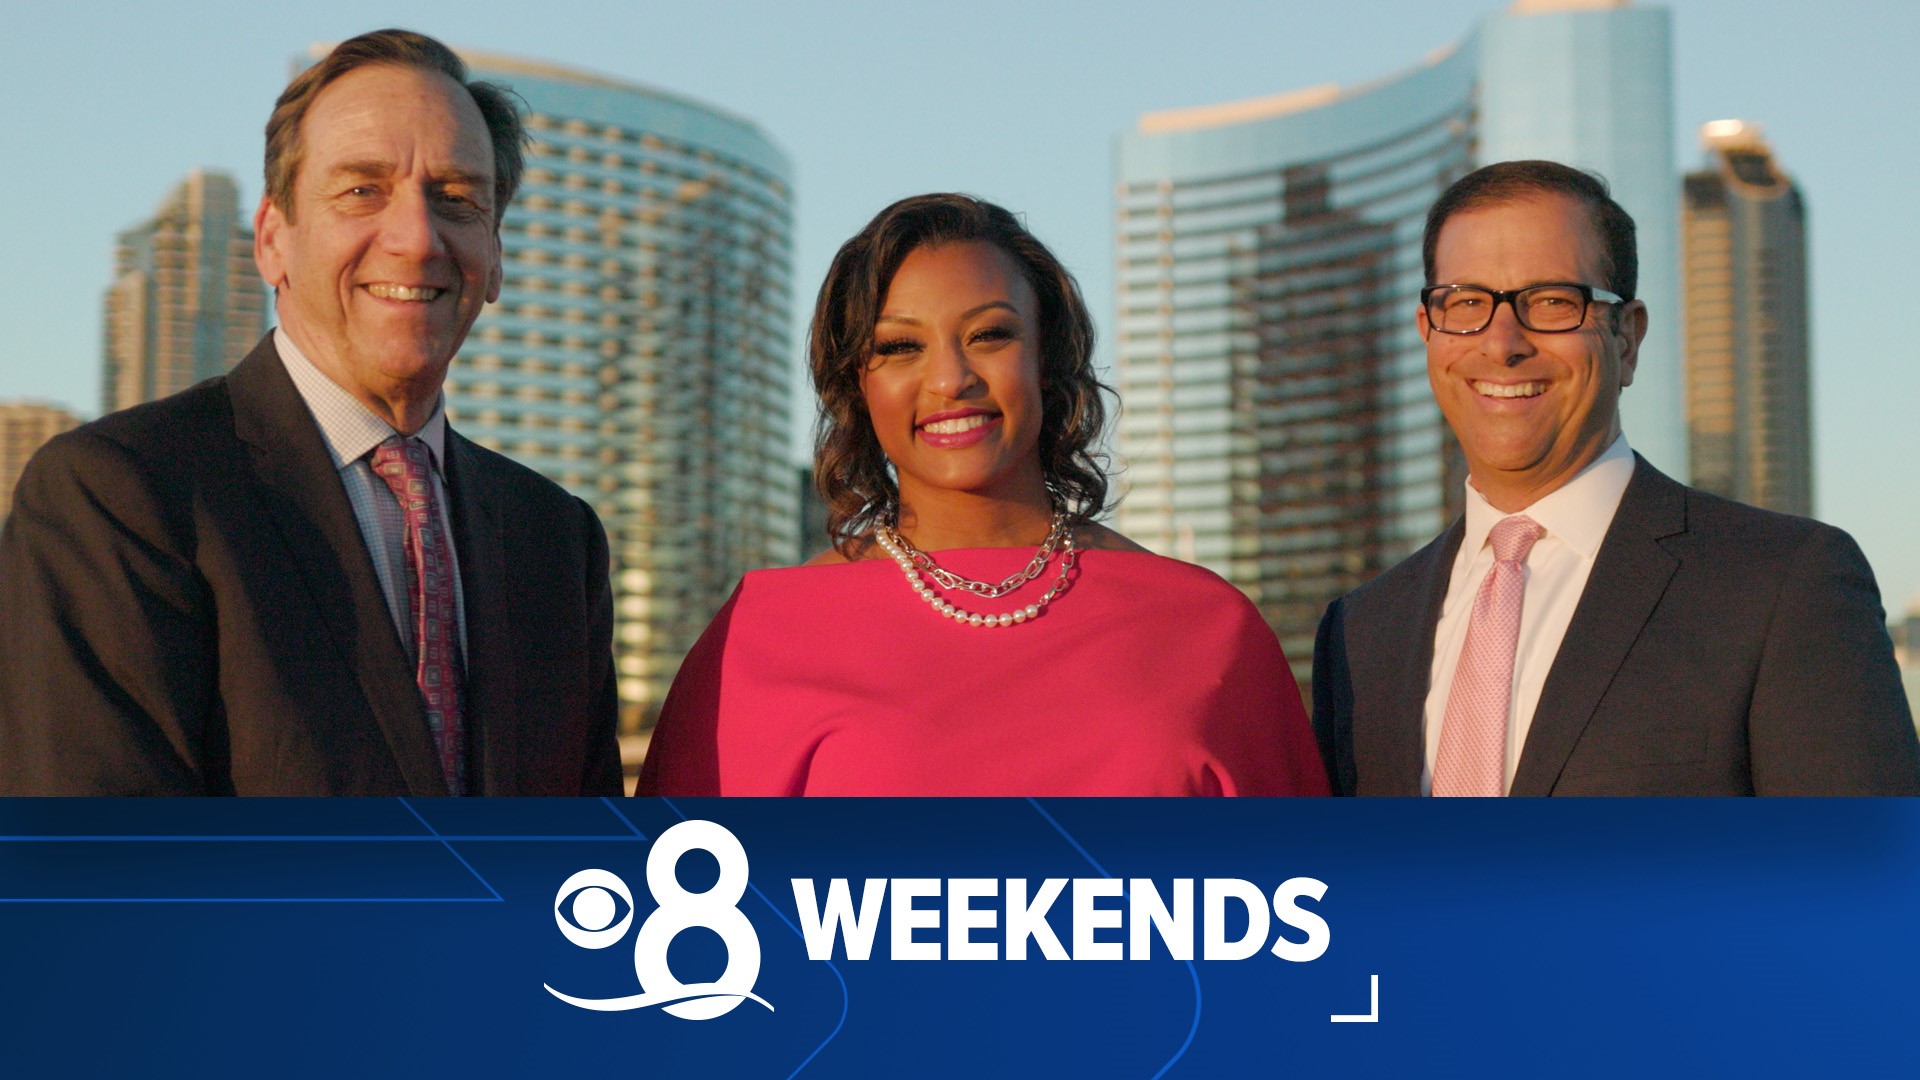 Stay informed with a full hour of San Diego's local news on the weekend.